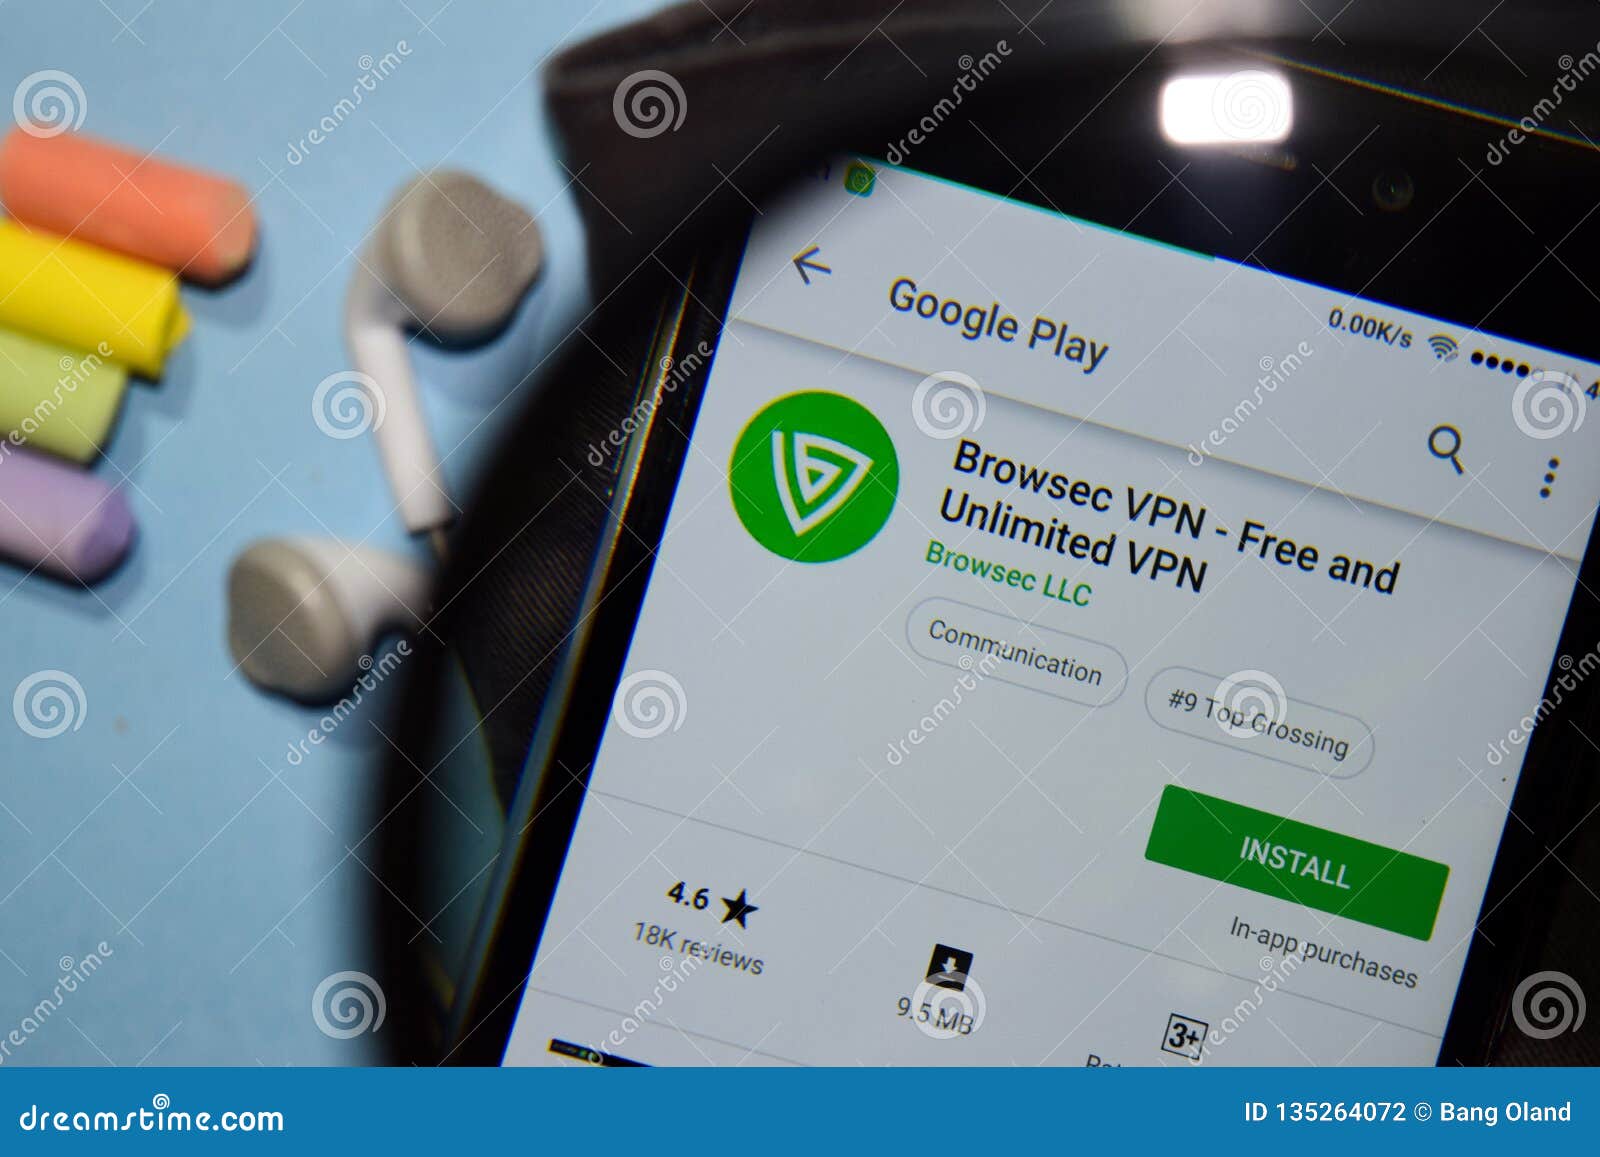 Browser VPN - Free and Unlimited Dev App with Magnifying on Smartphone  Screen Editorial Photography - Image of connect, illustrative: 135264072